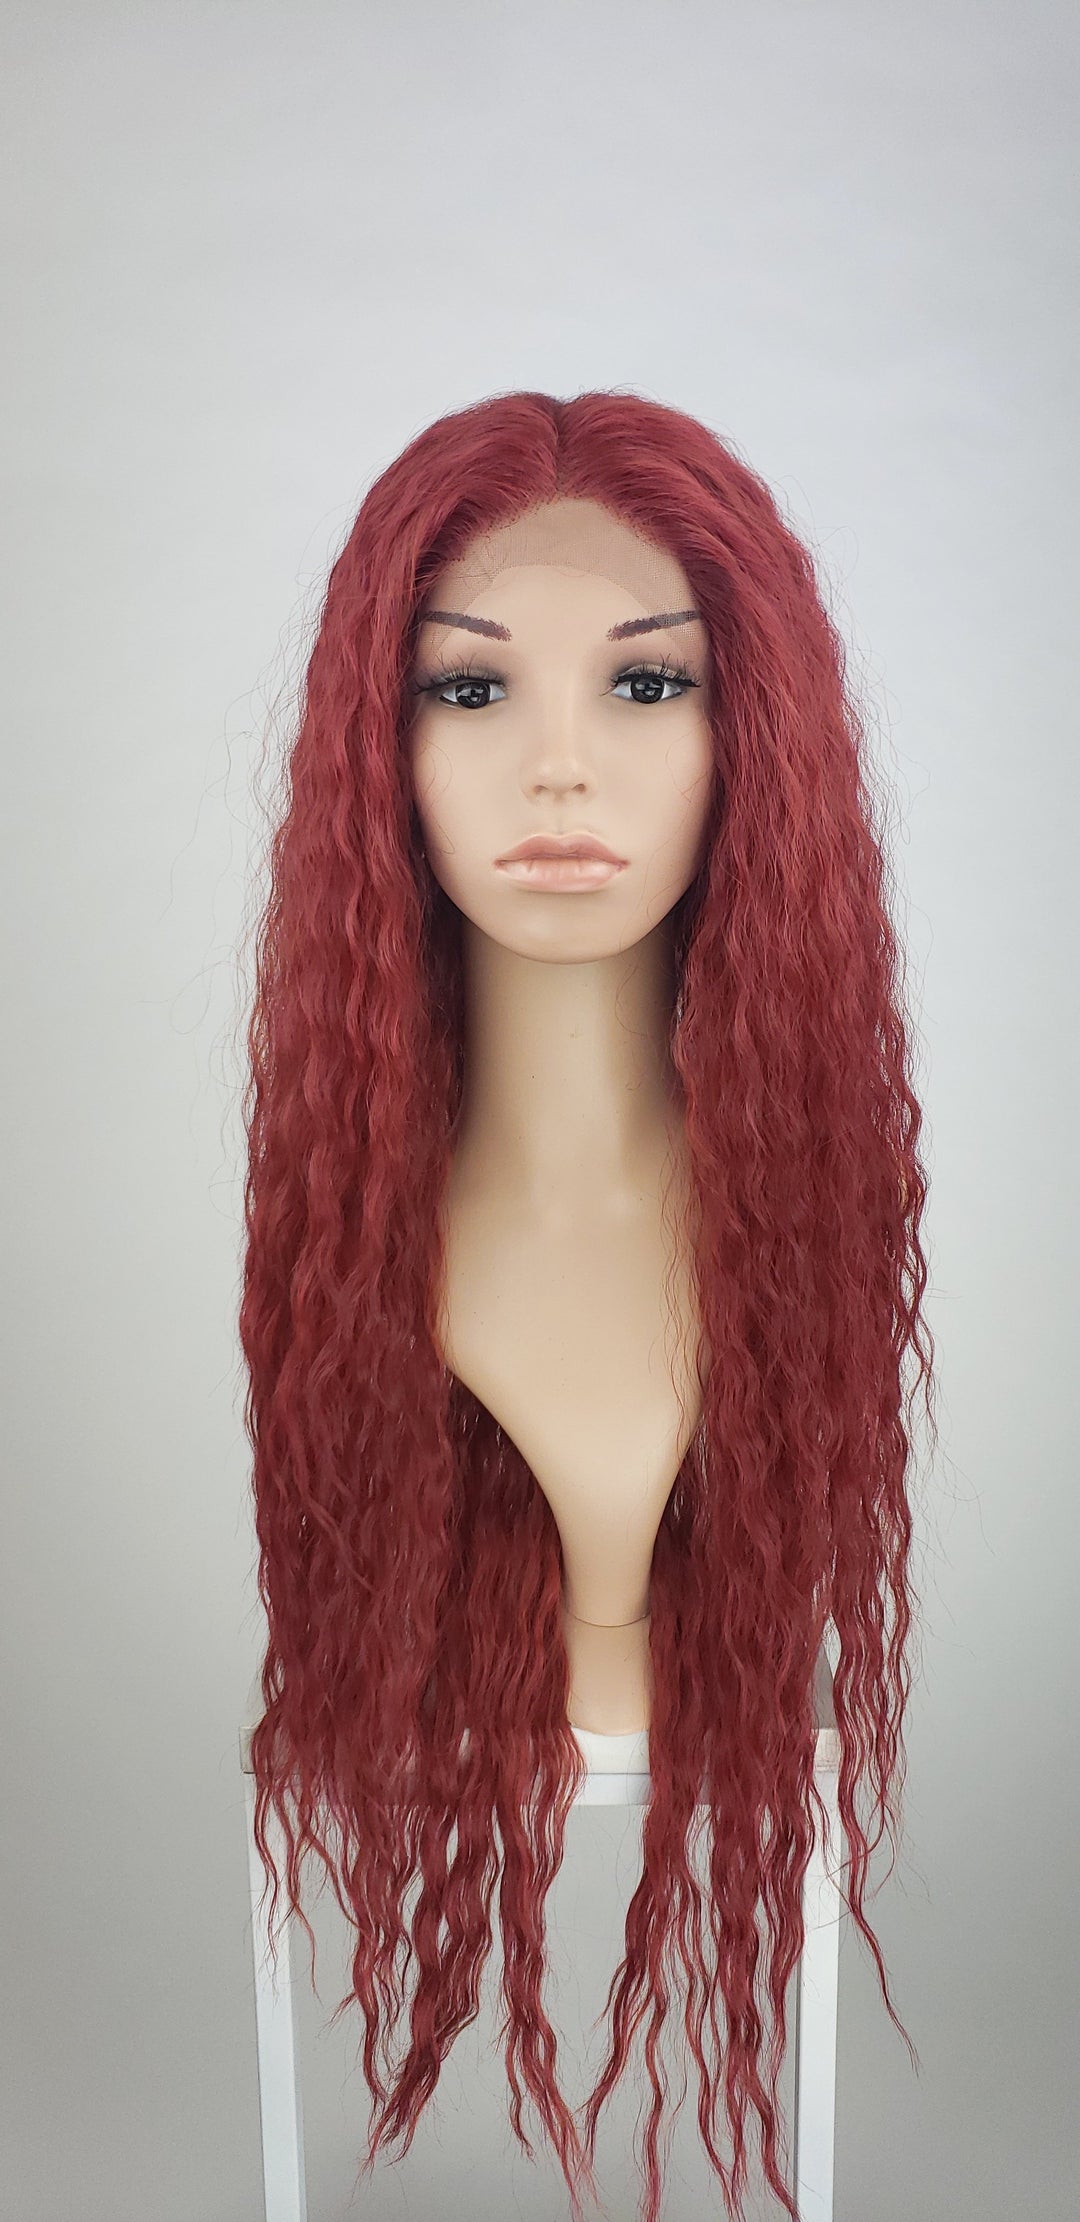 Pose Wigs Cherry Red Long Curly Lace Front Wig - Duchess Series LDRVN99